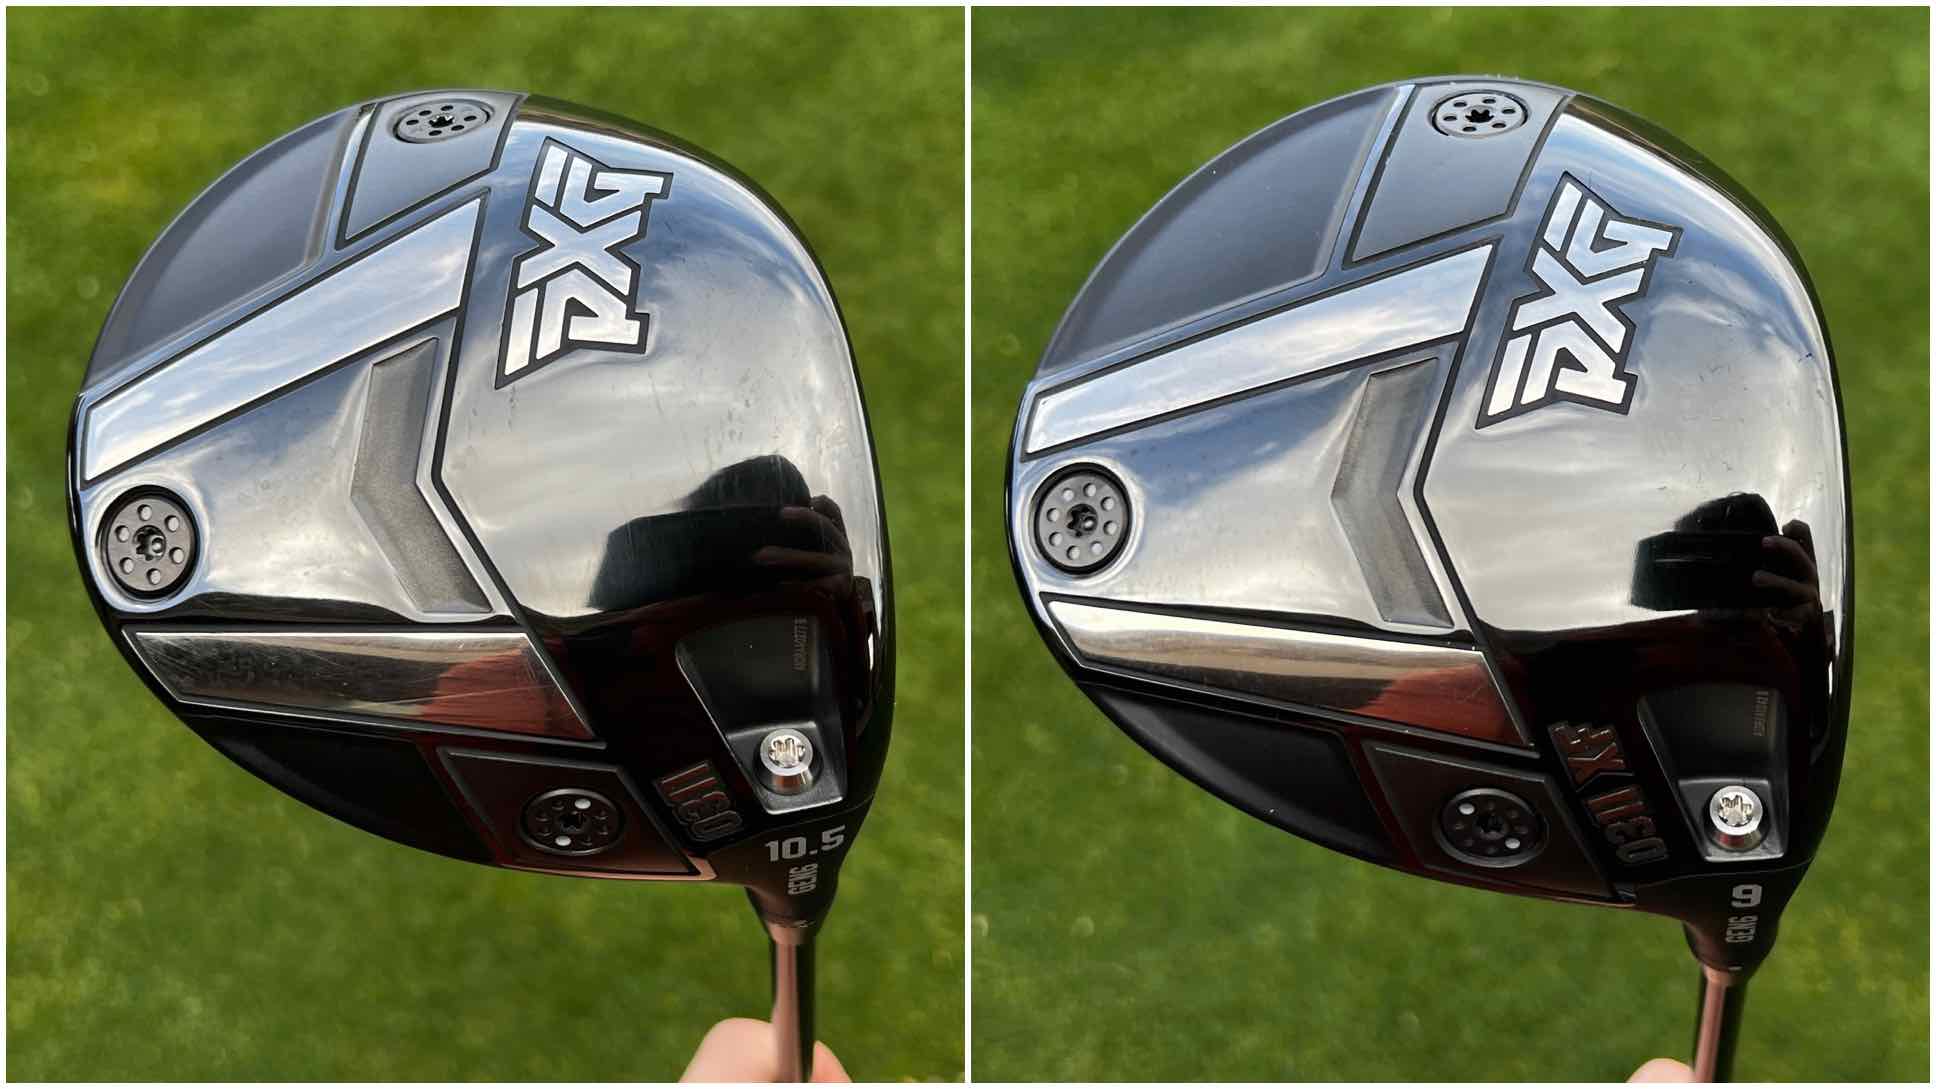 PXG releases all new GEN6 series woods and irons - HNK19